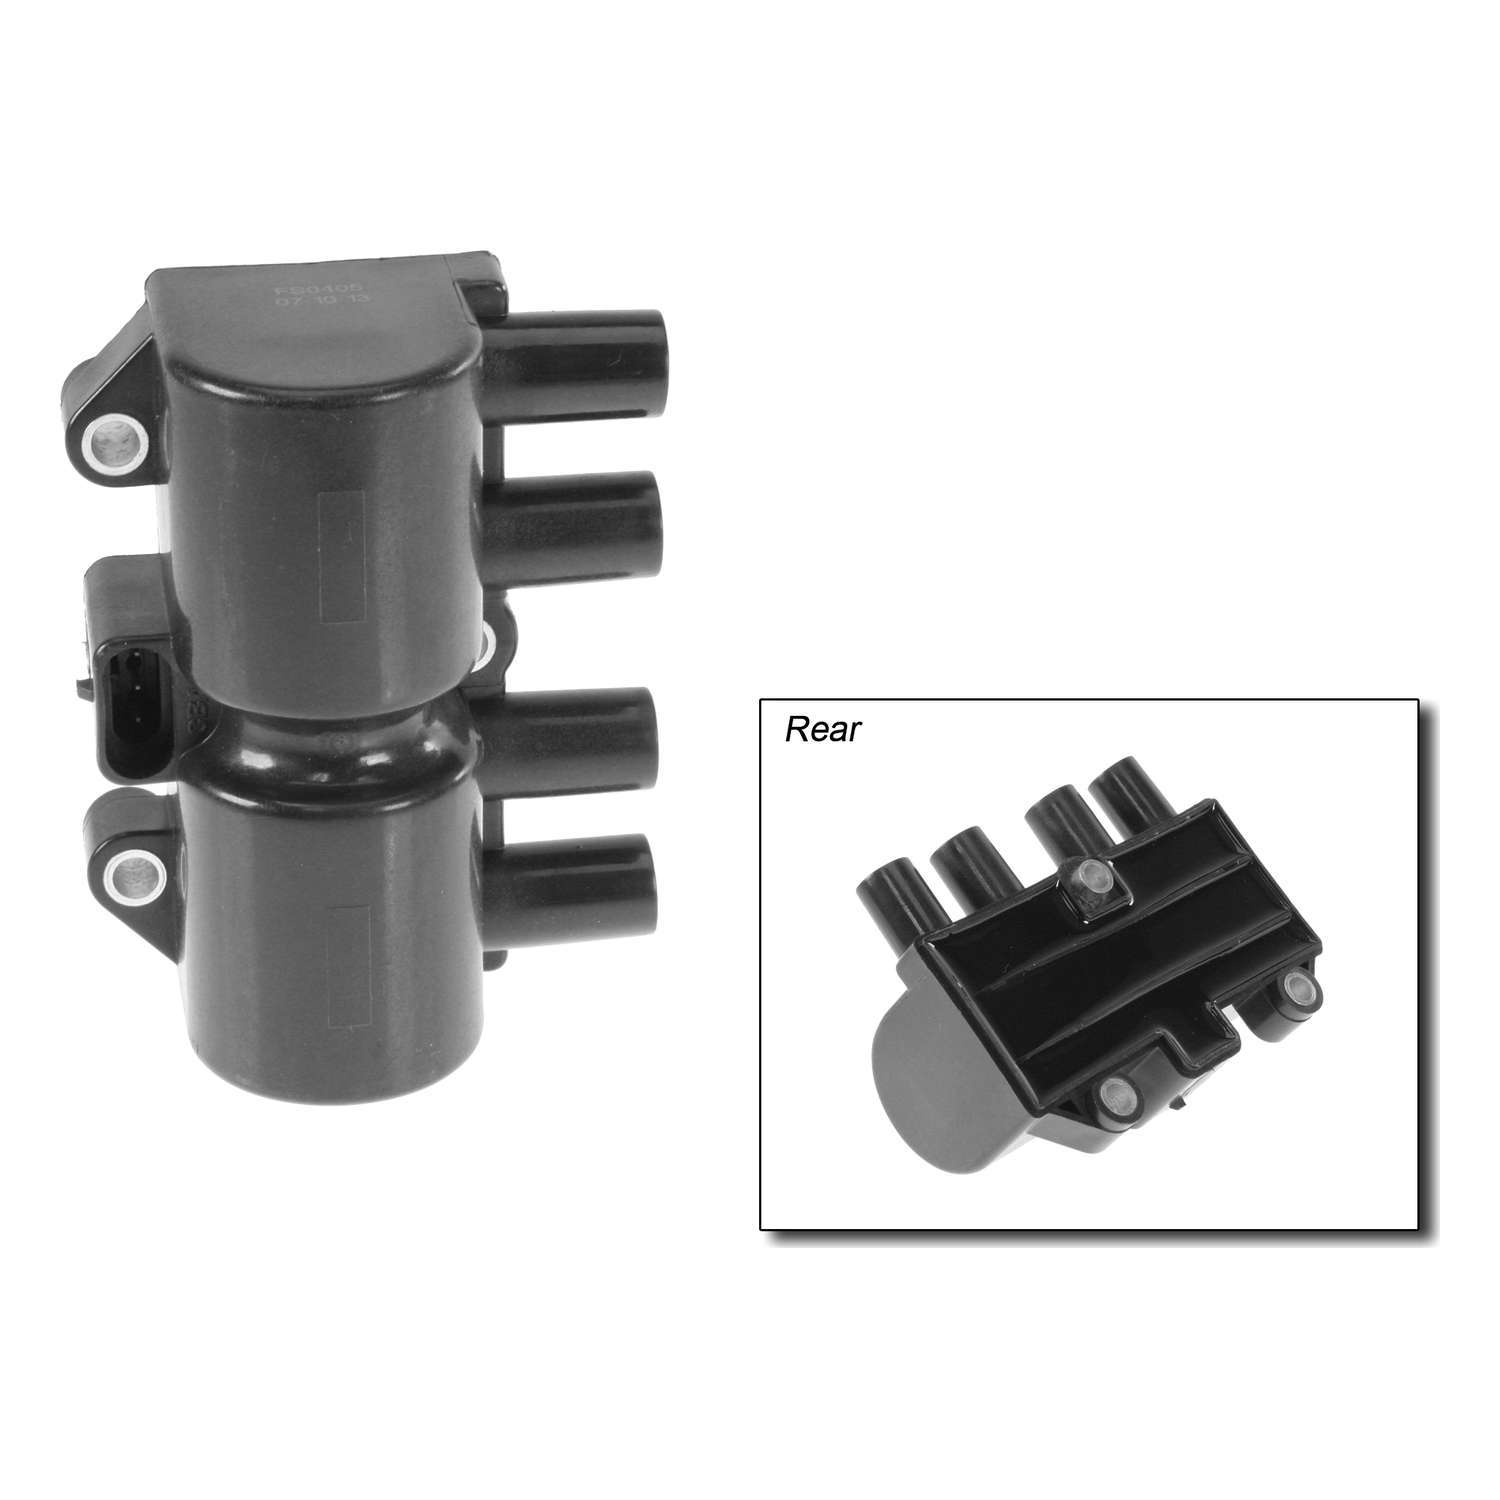 Prenco Ignition Coil - image 1 of 1